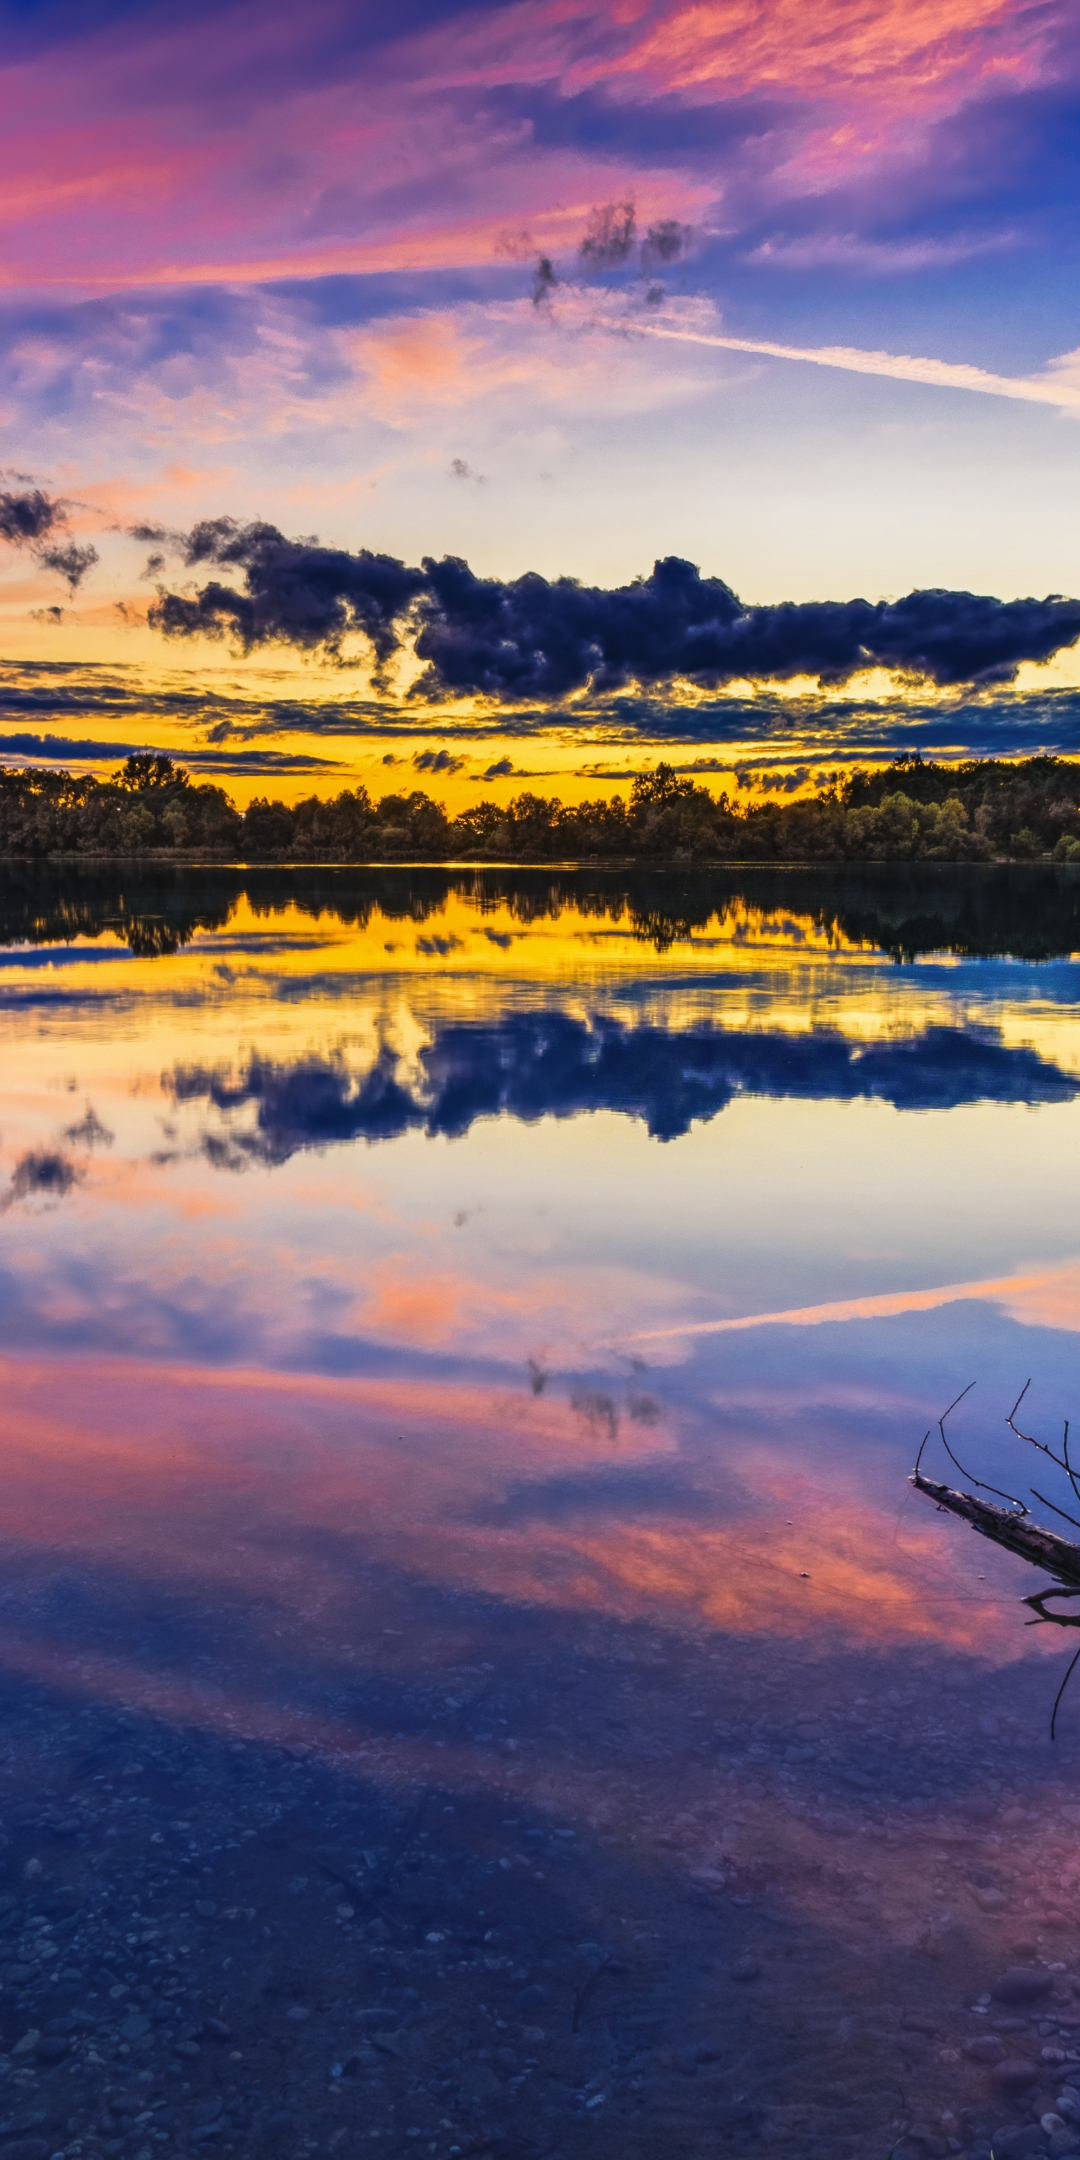 Lake, sunset, reflections, colorful sky, nature, 1080x2160 wallpaper